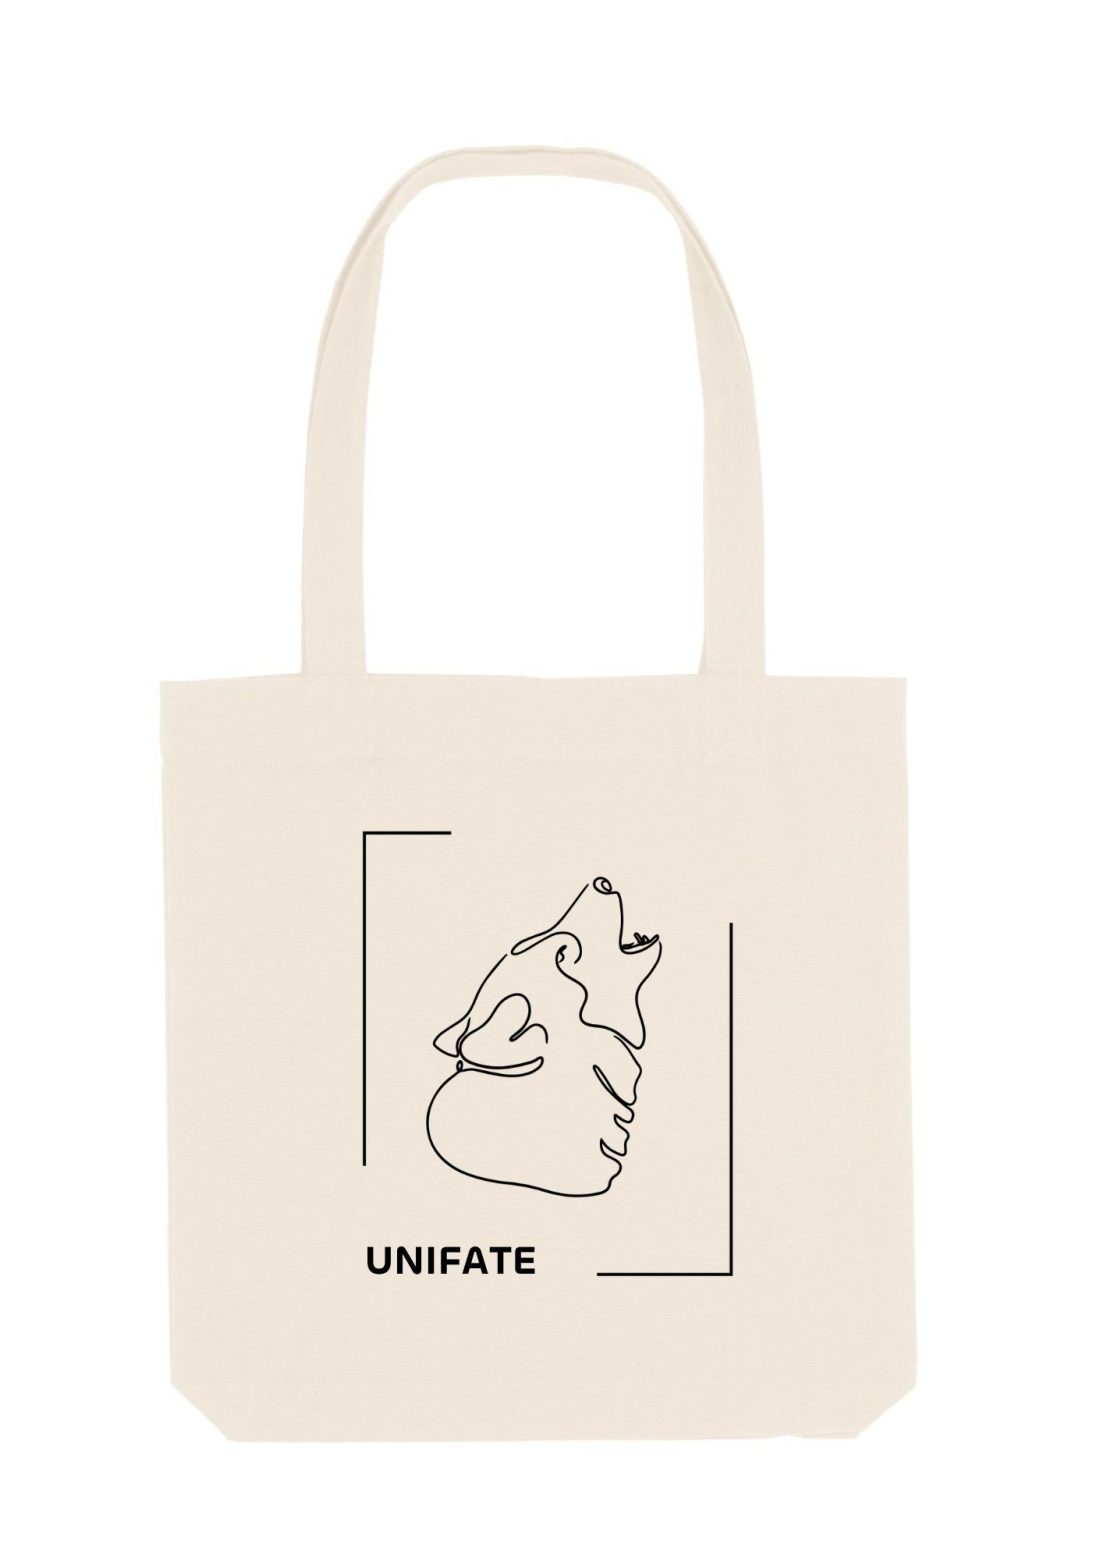 unifate-marque-responsable-rennes-collection-faune-ete-tote-bag-blanc-recto